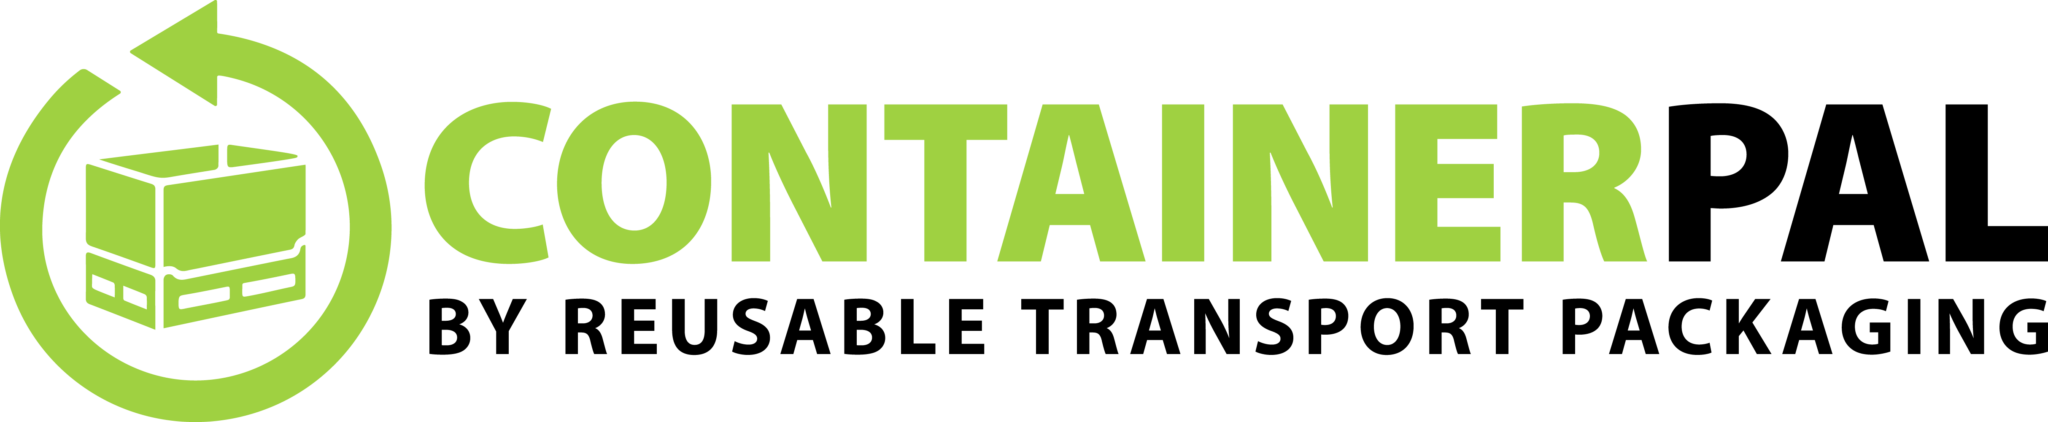 ContainerPAL Rentals Logo